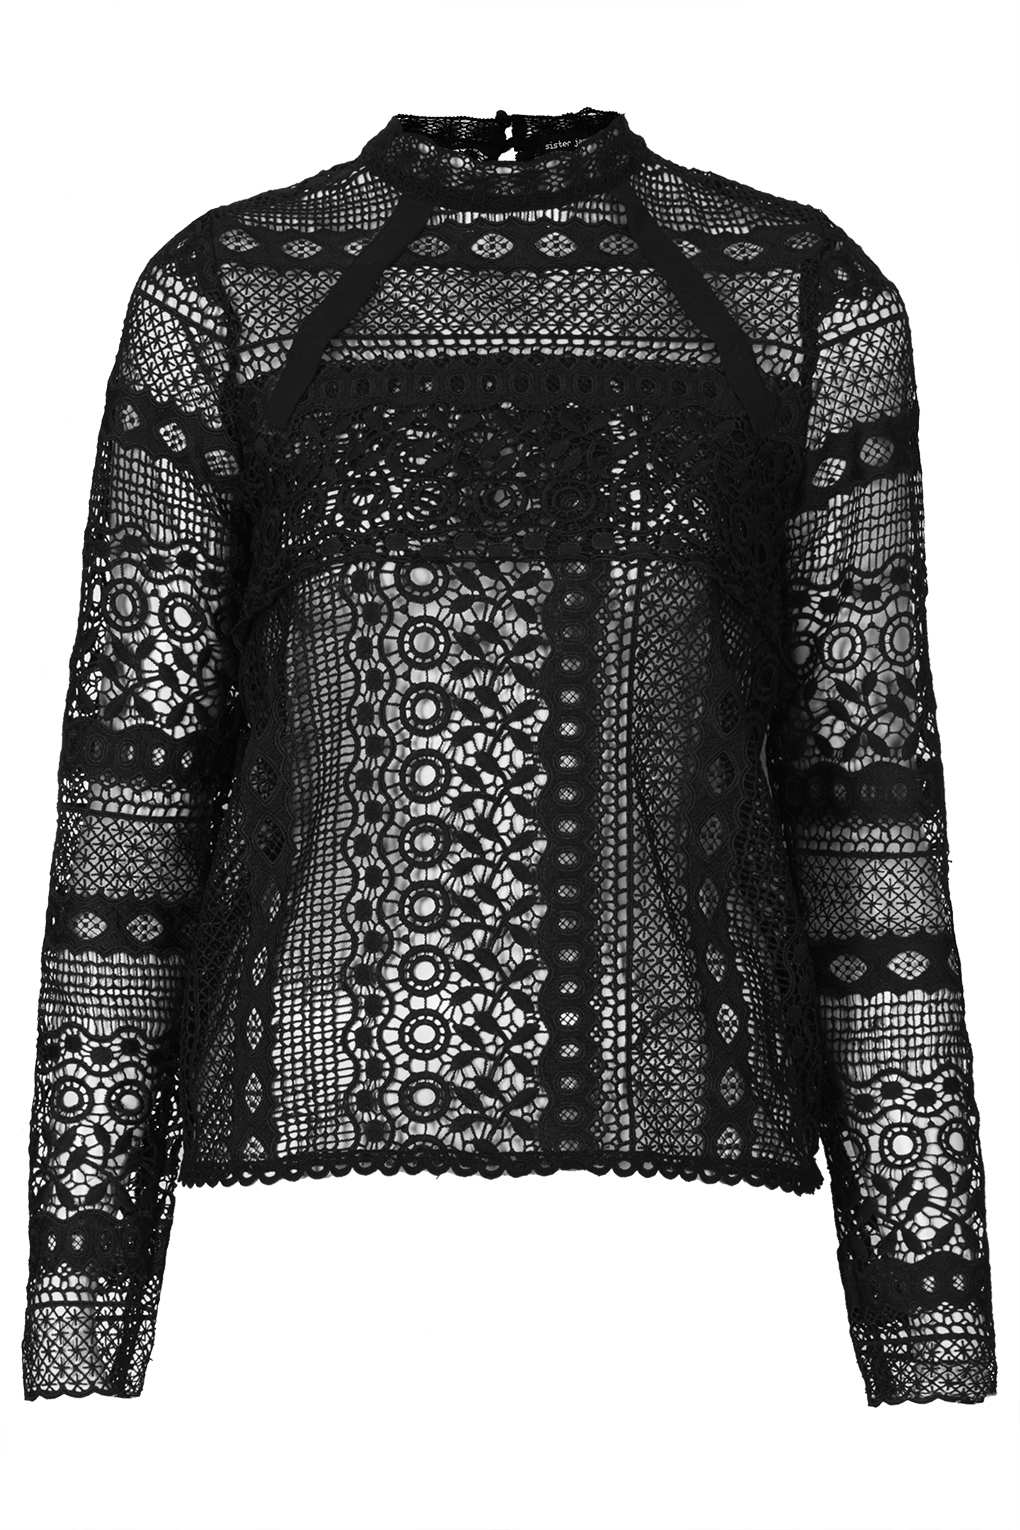 Topshop Lace High Neck Top in Black | Lyst